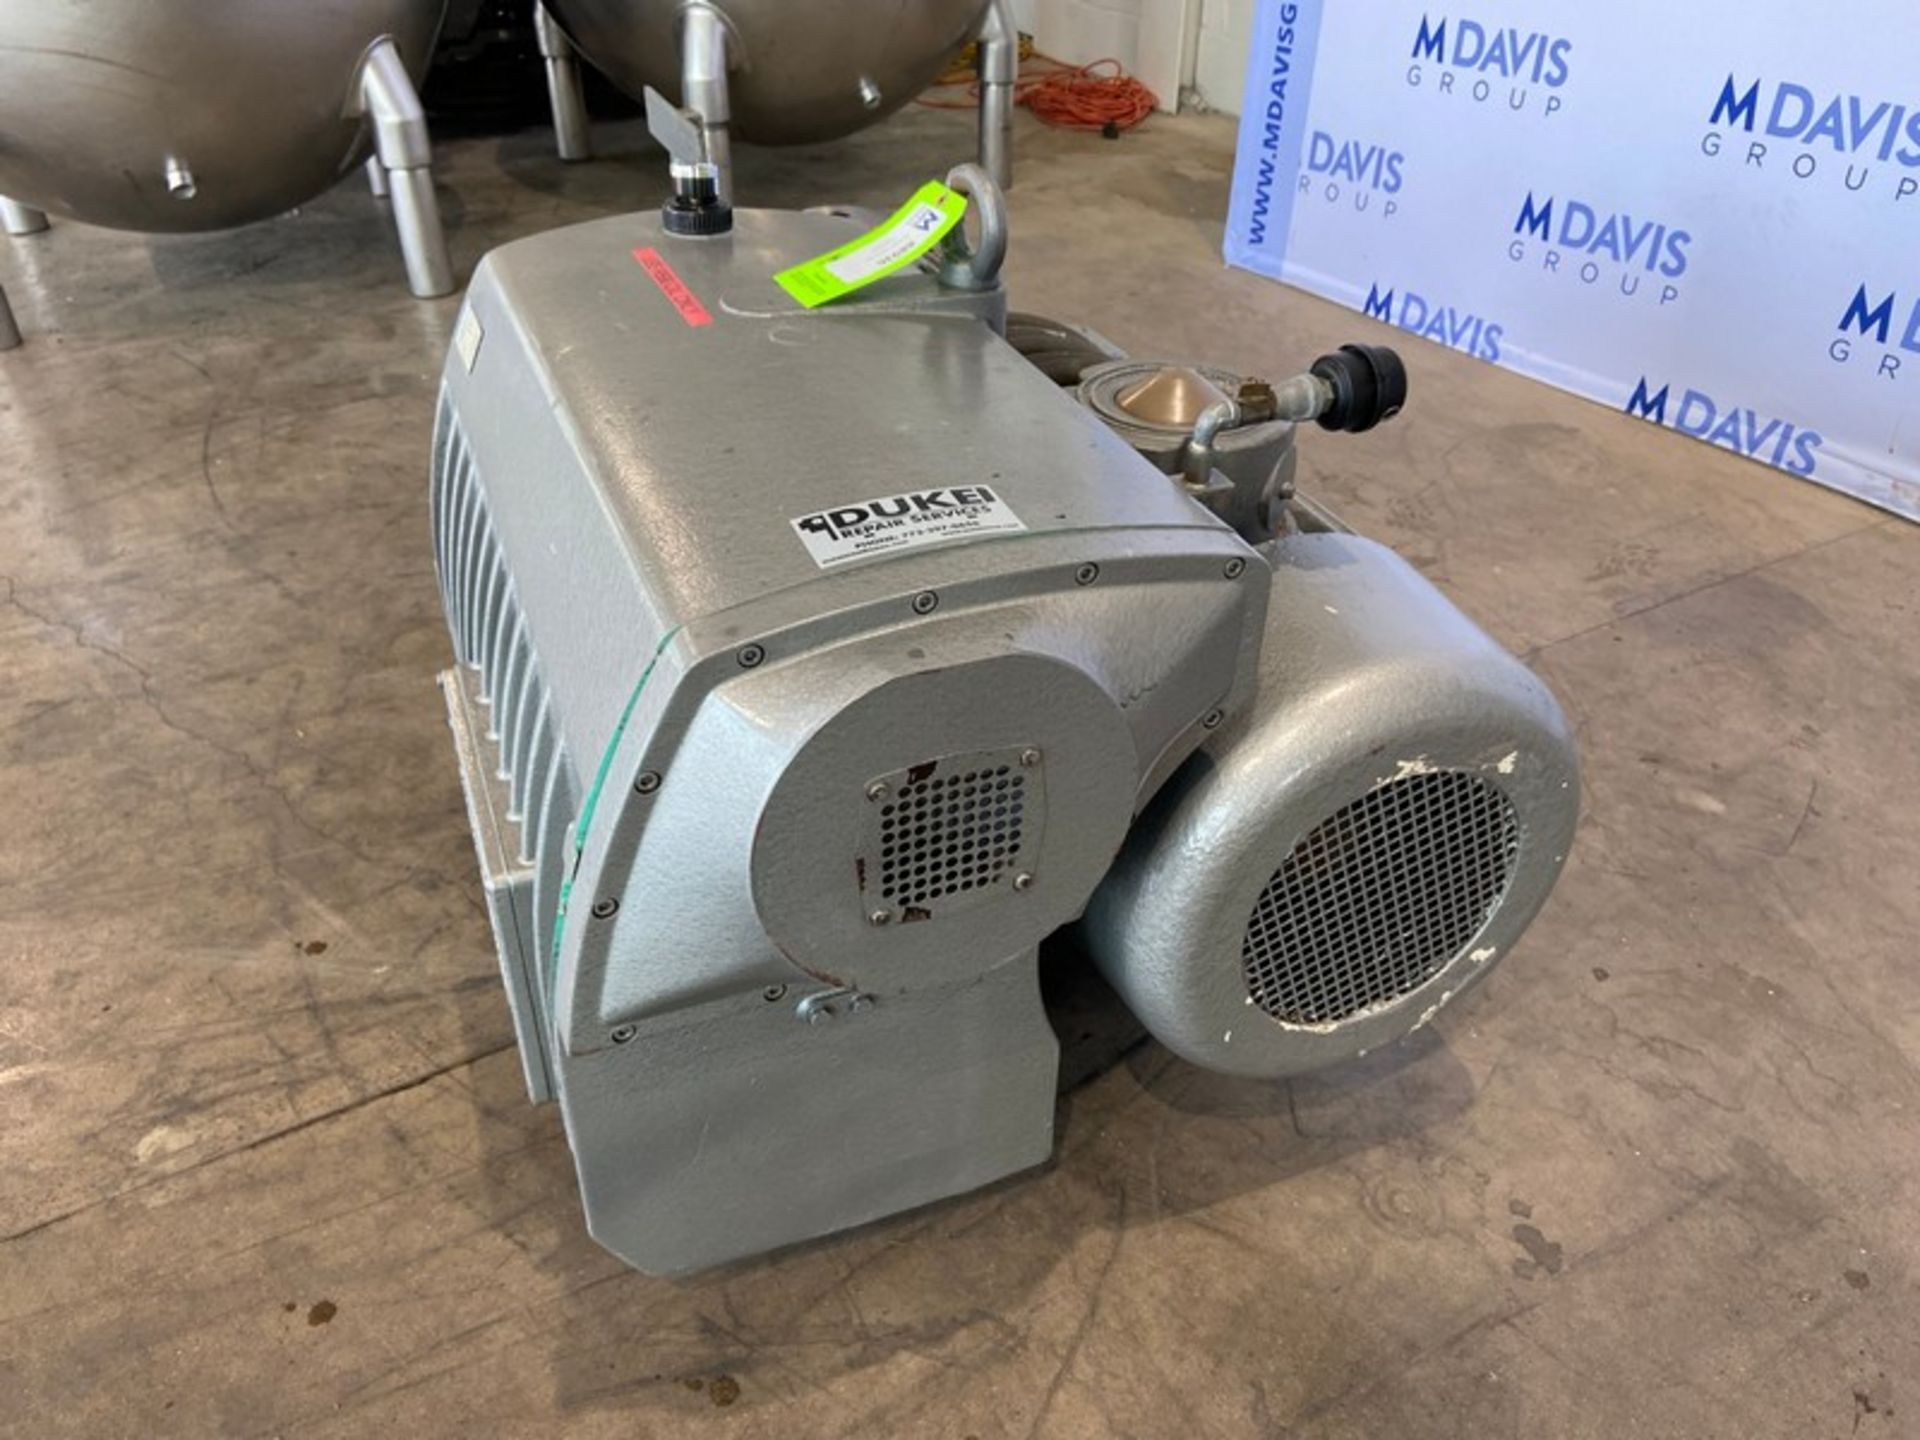 Buusch 20 hp Vacuum Pump,-Type RA0400-B033-1103, S/N C1440, with Toshiba 208-230/460 Volts, 3 Phase, - Image 6 of 9